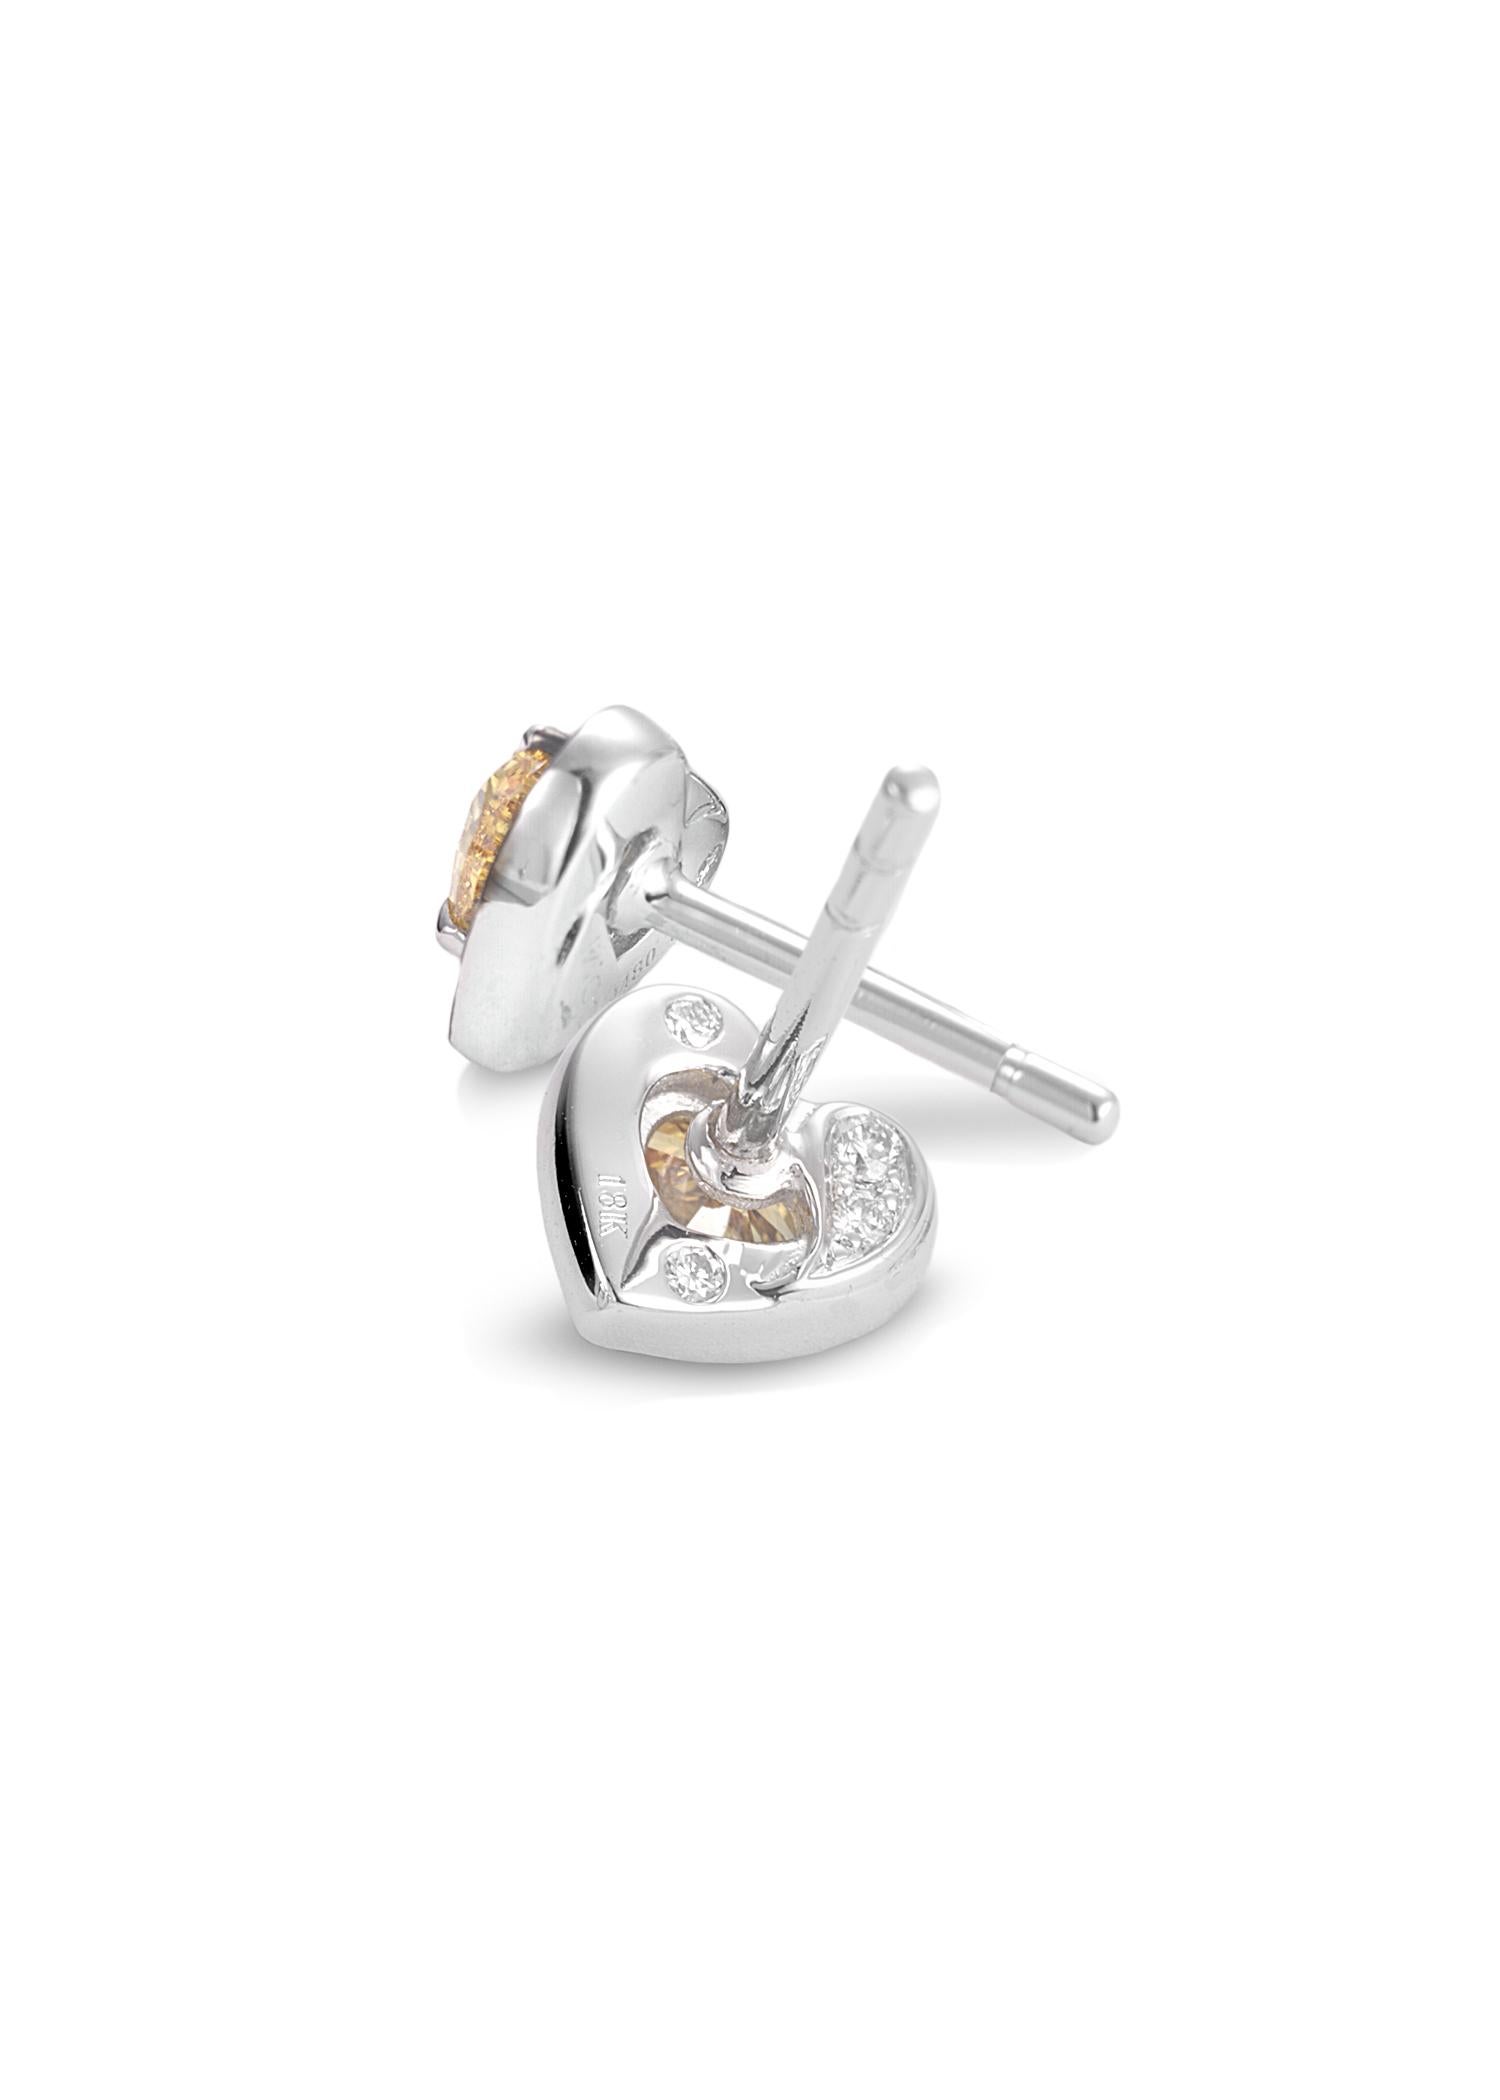 Trinity collection heart-shaped stud earrings set in 18K White Gold with Vivid Orange 0.46ct and Black Diamonds. 